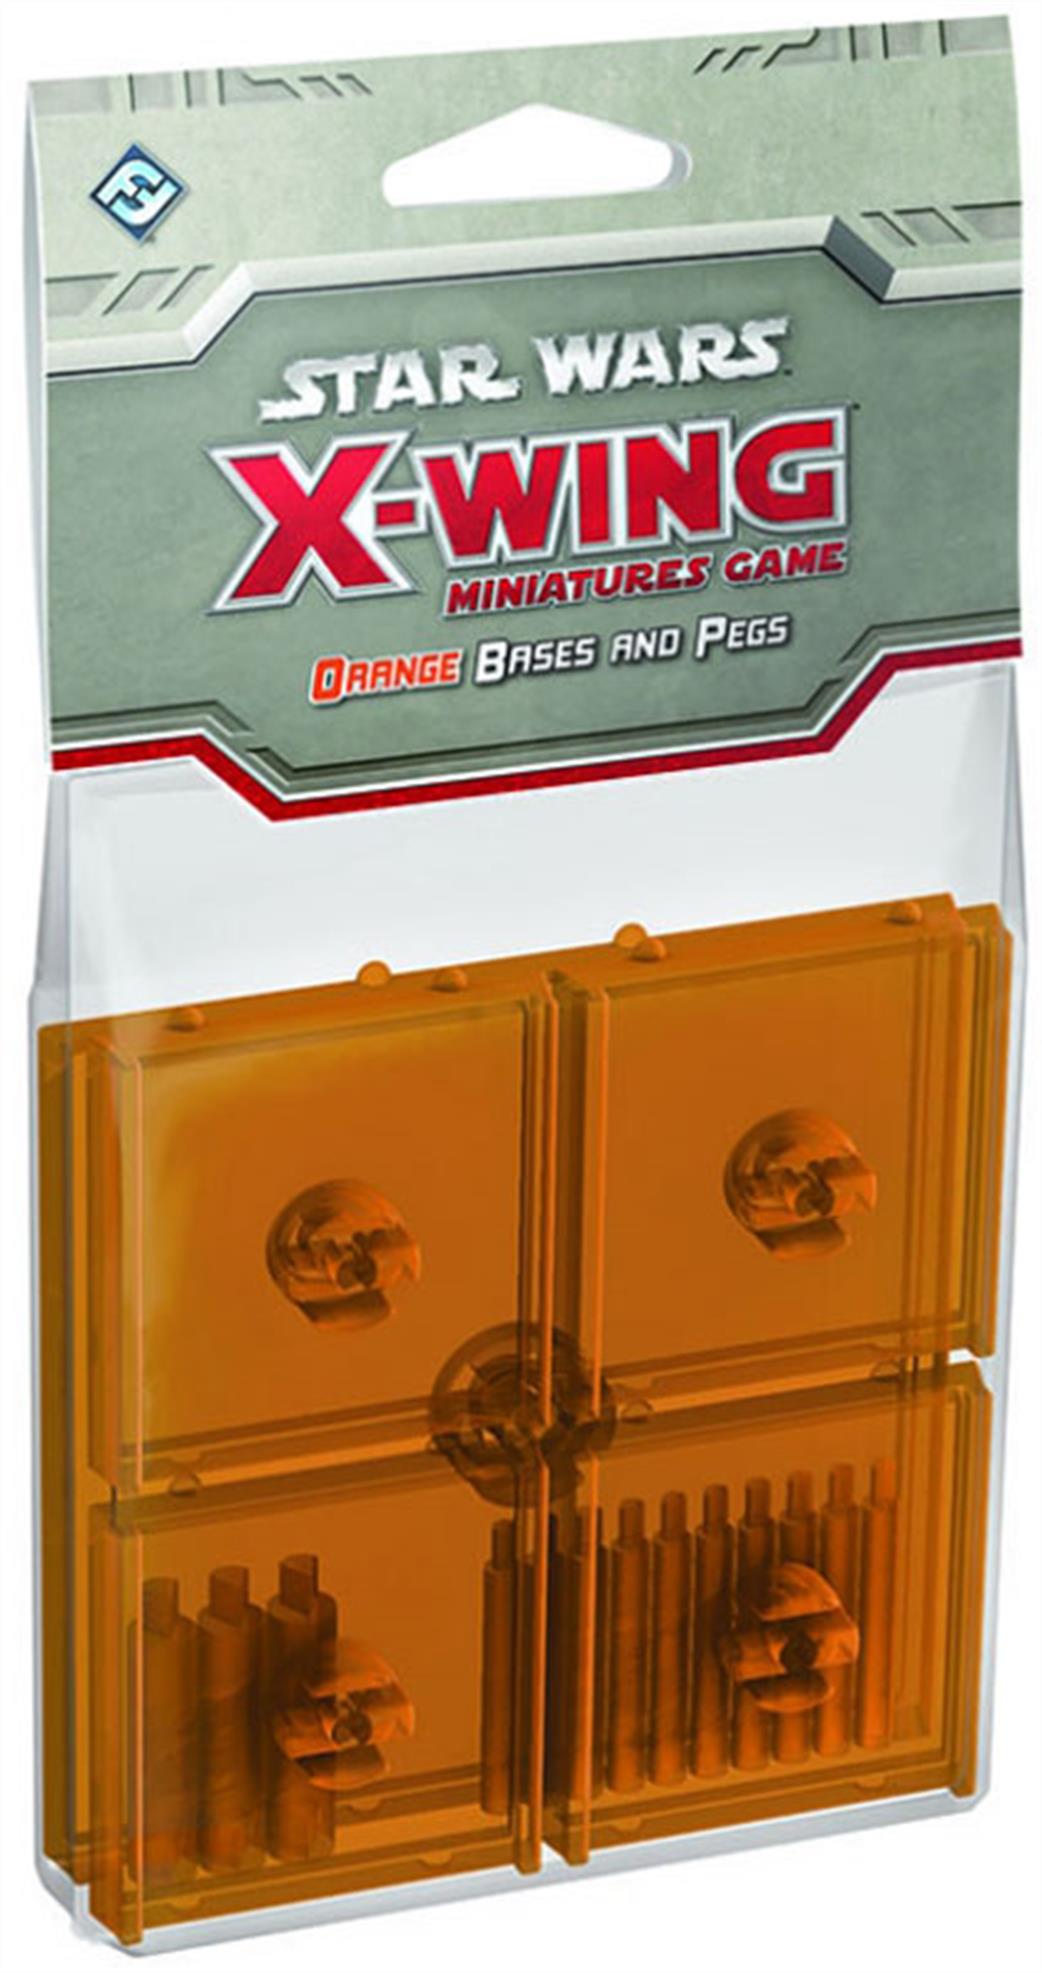 Fantasy Flight Games  SWX47 Orange Bases and Pegs Accessory Pack, Star Wars X-Wing